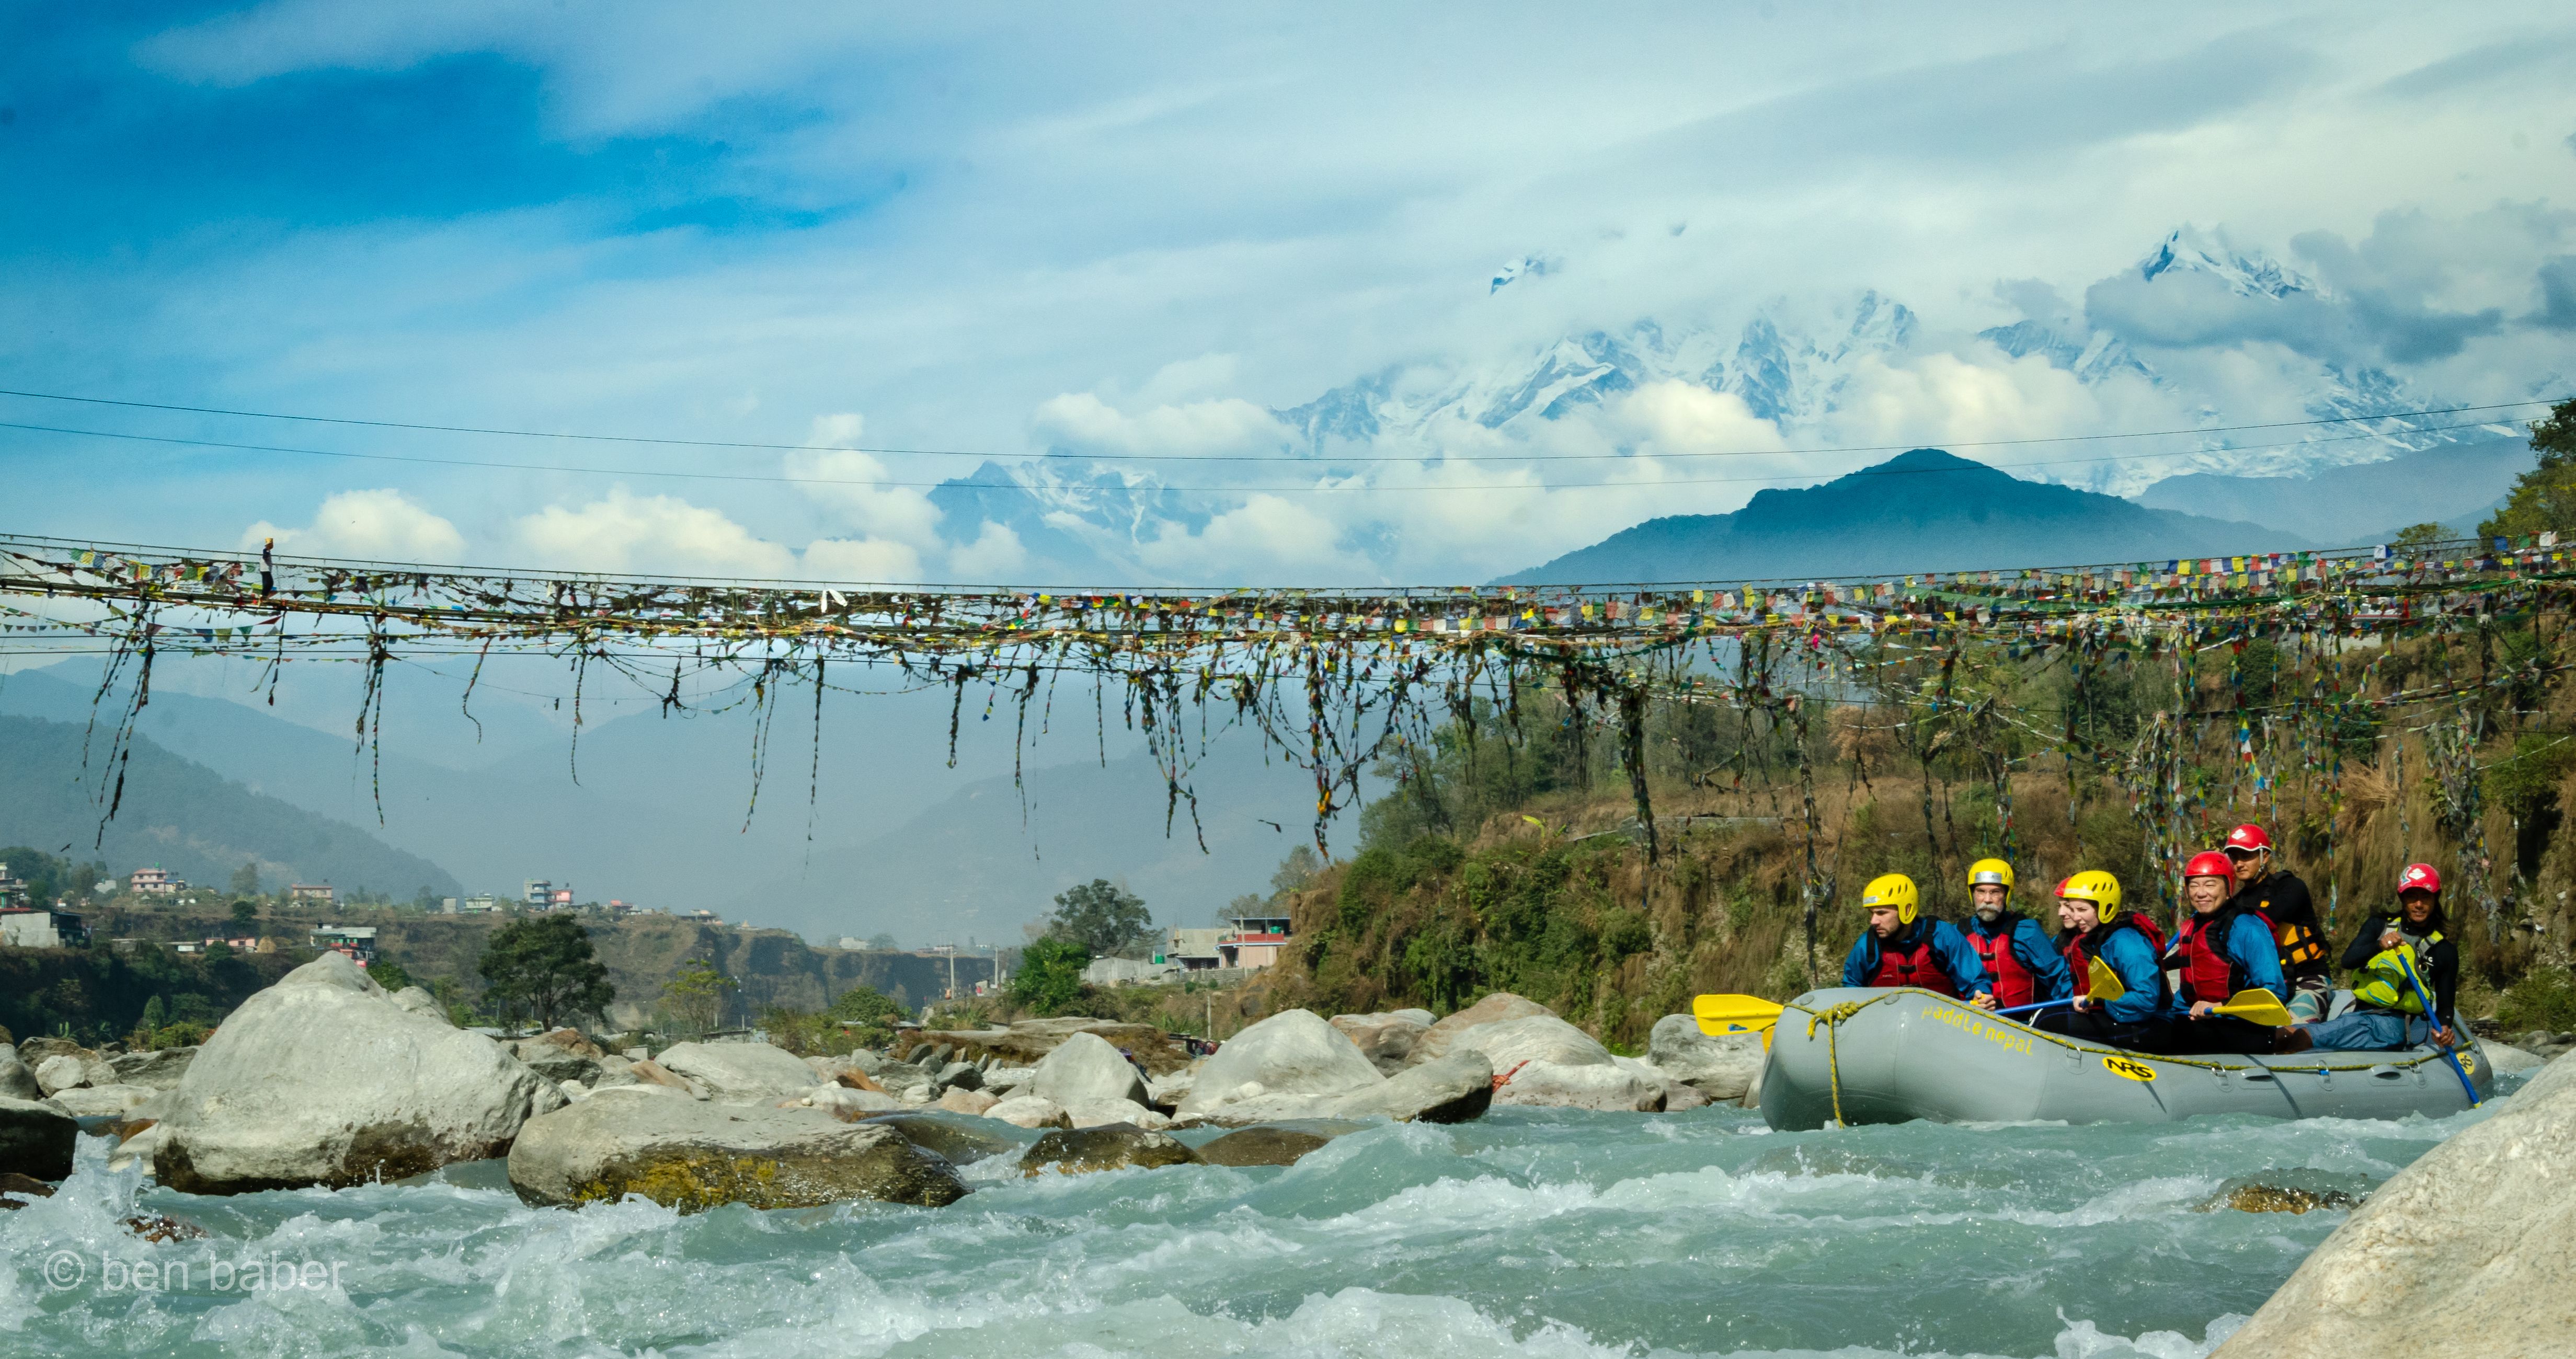 Rafting On The Upper Seti River In Nepal With Photographer Ben